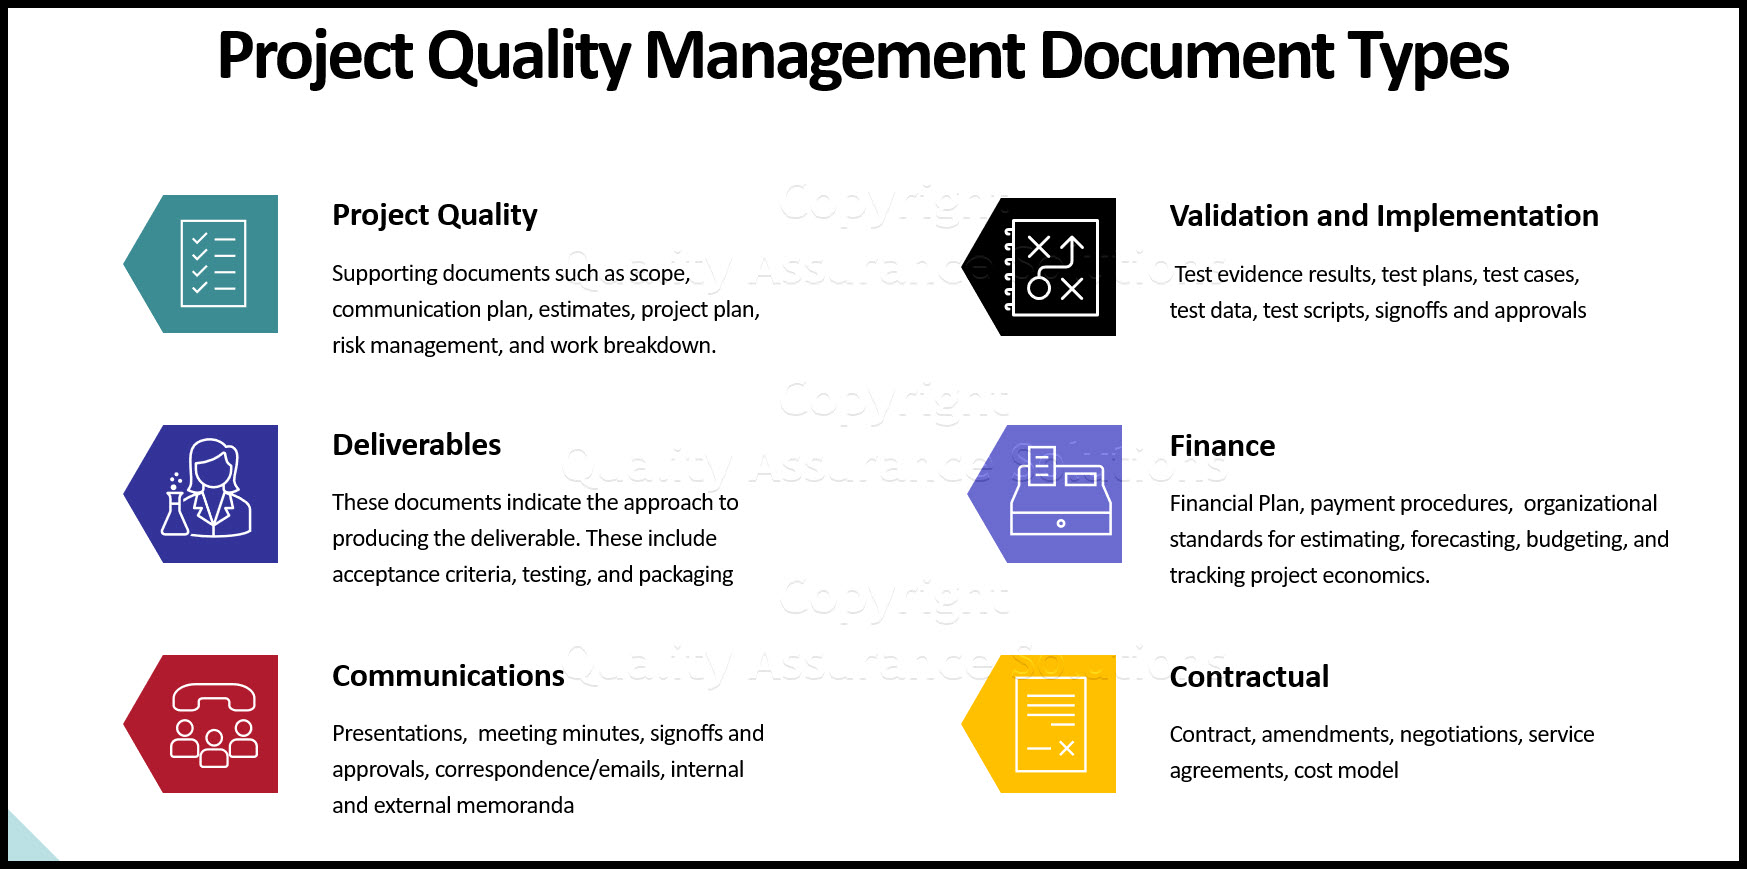 This article discusses key items to consider for your project quality management plan